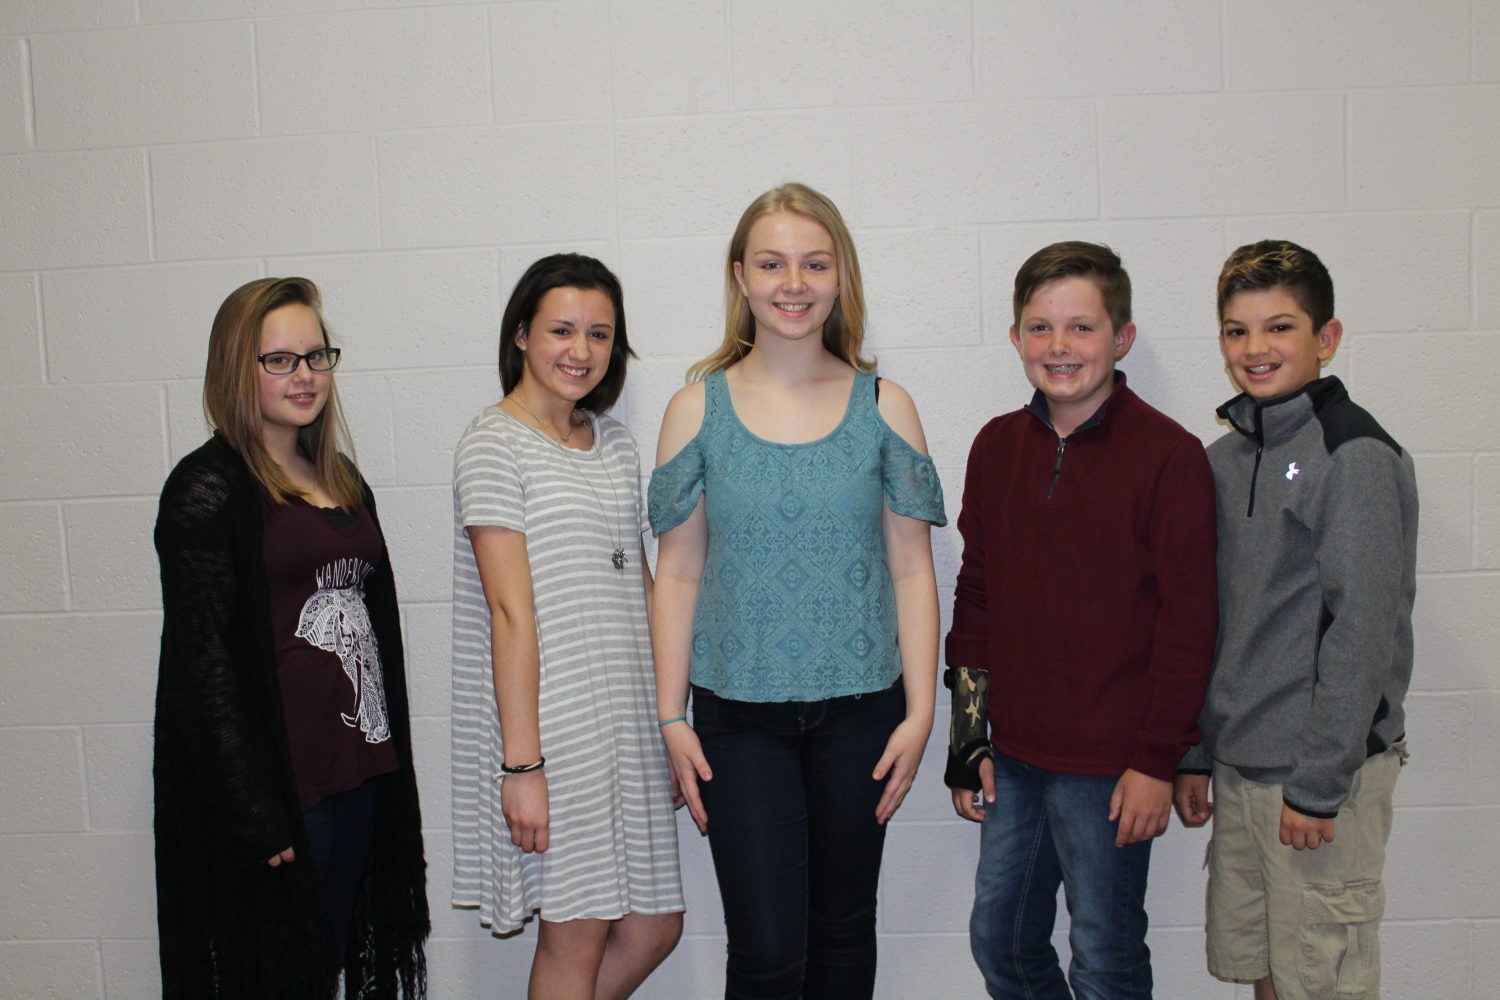 Photo by Landen Mowdy
Duncan Middle School elected its new Student Council officers. The officers include, from left, Lyndsey Newman, Carsyn Etheridge, Katie Presgrove, Gavin Curry and Korbin Hammack.